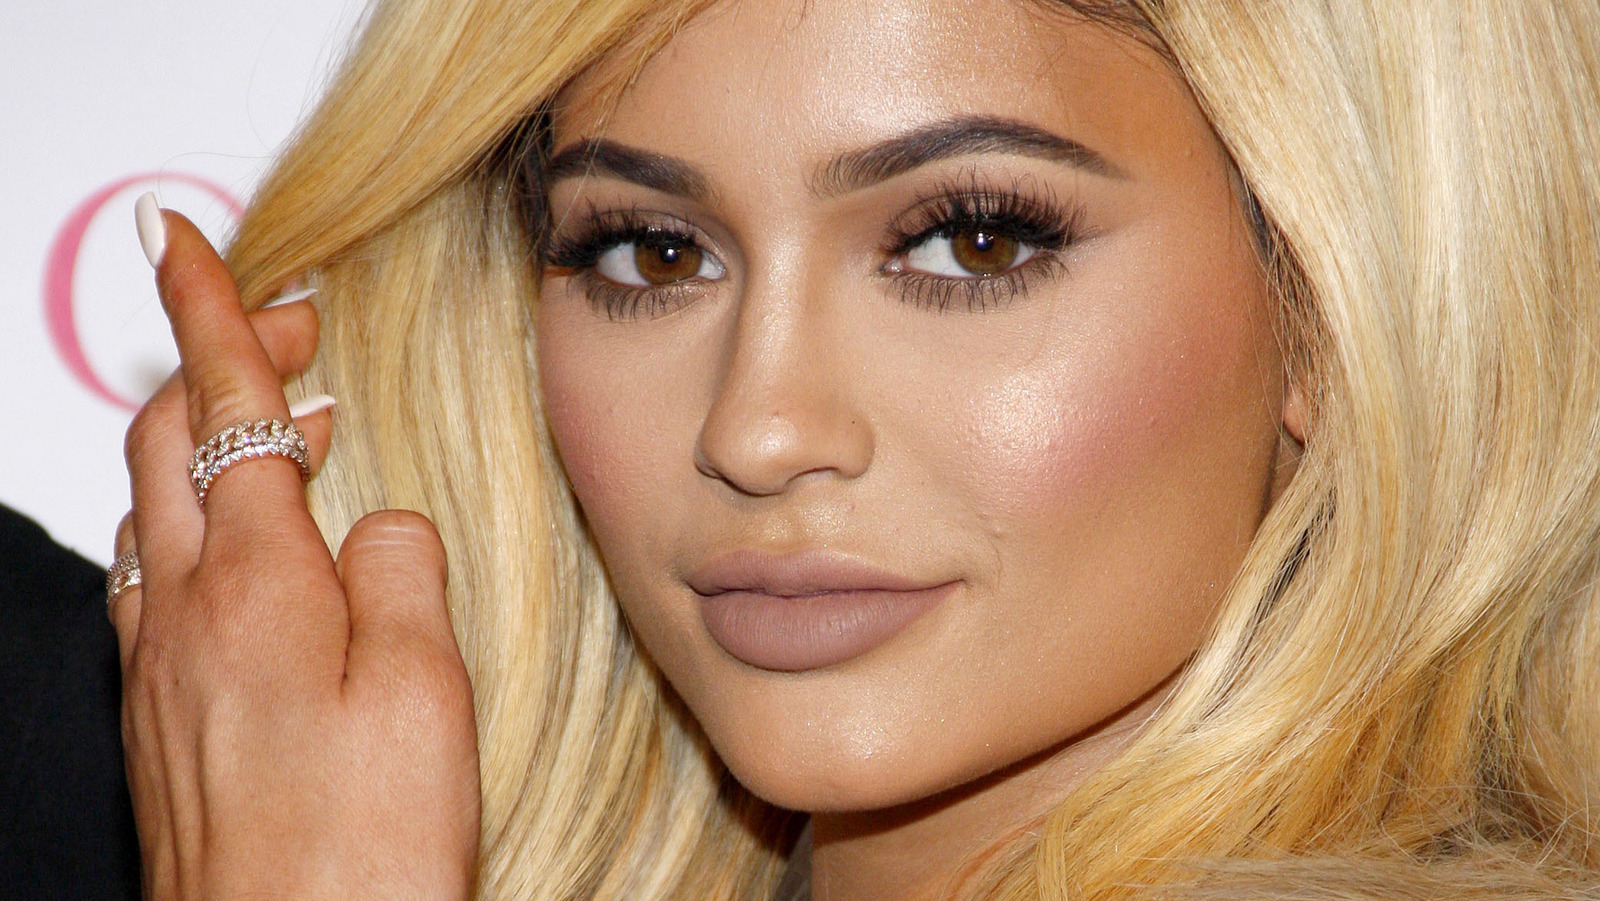 Kylie Jenner's Swimsuits Are Getting Dragged On The Internet